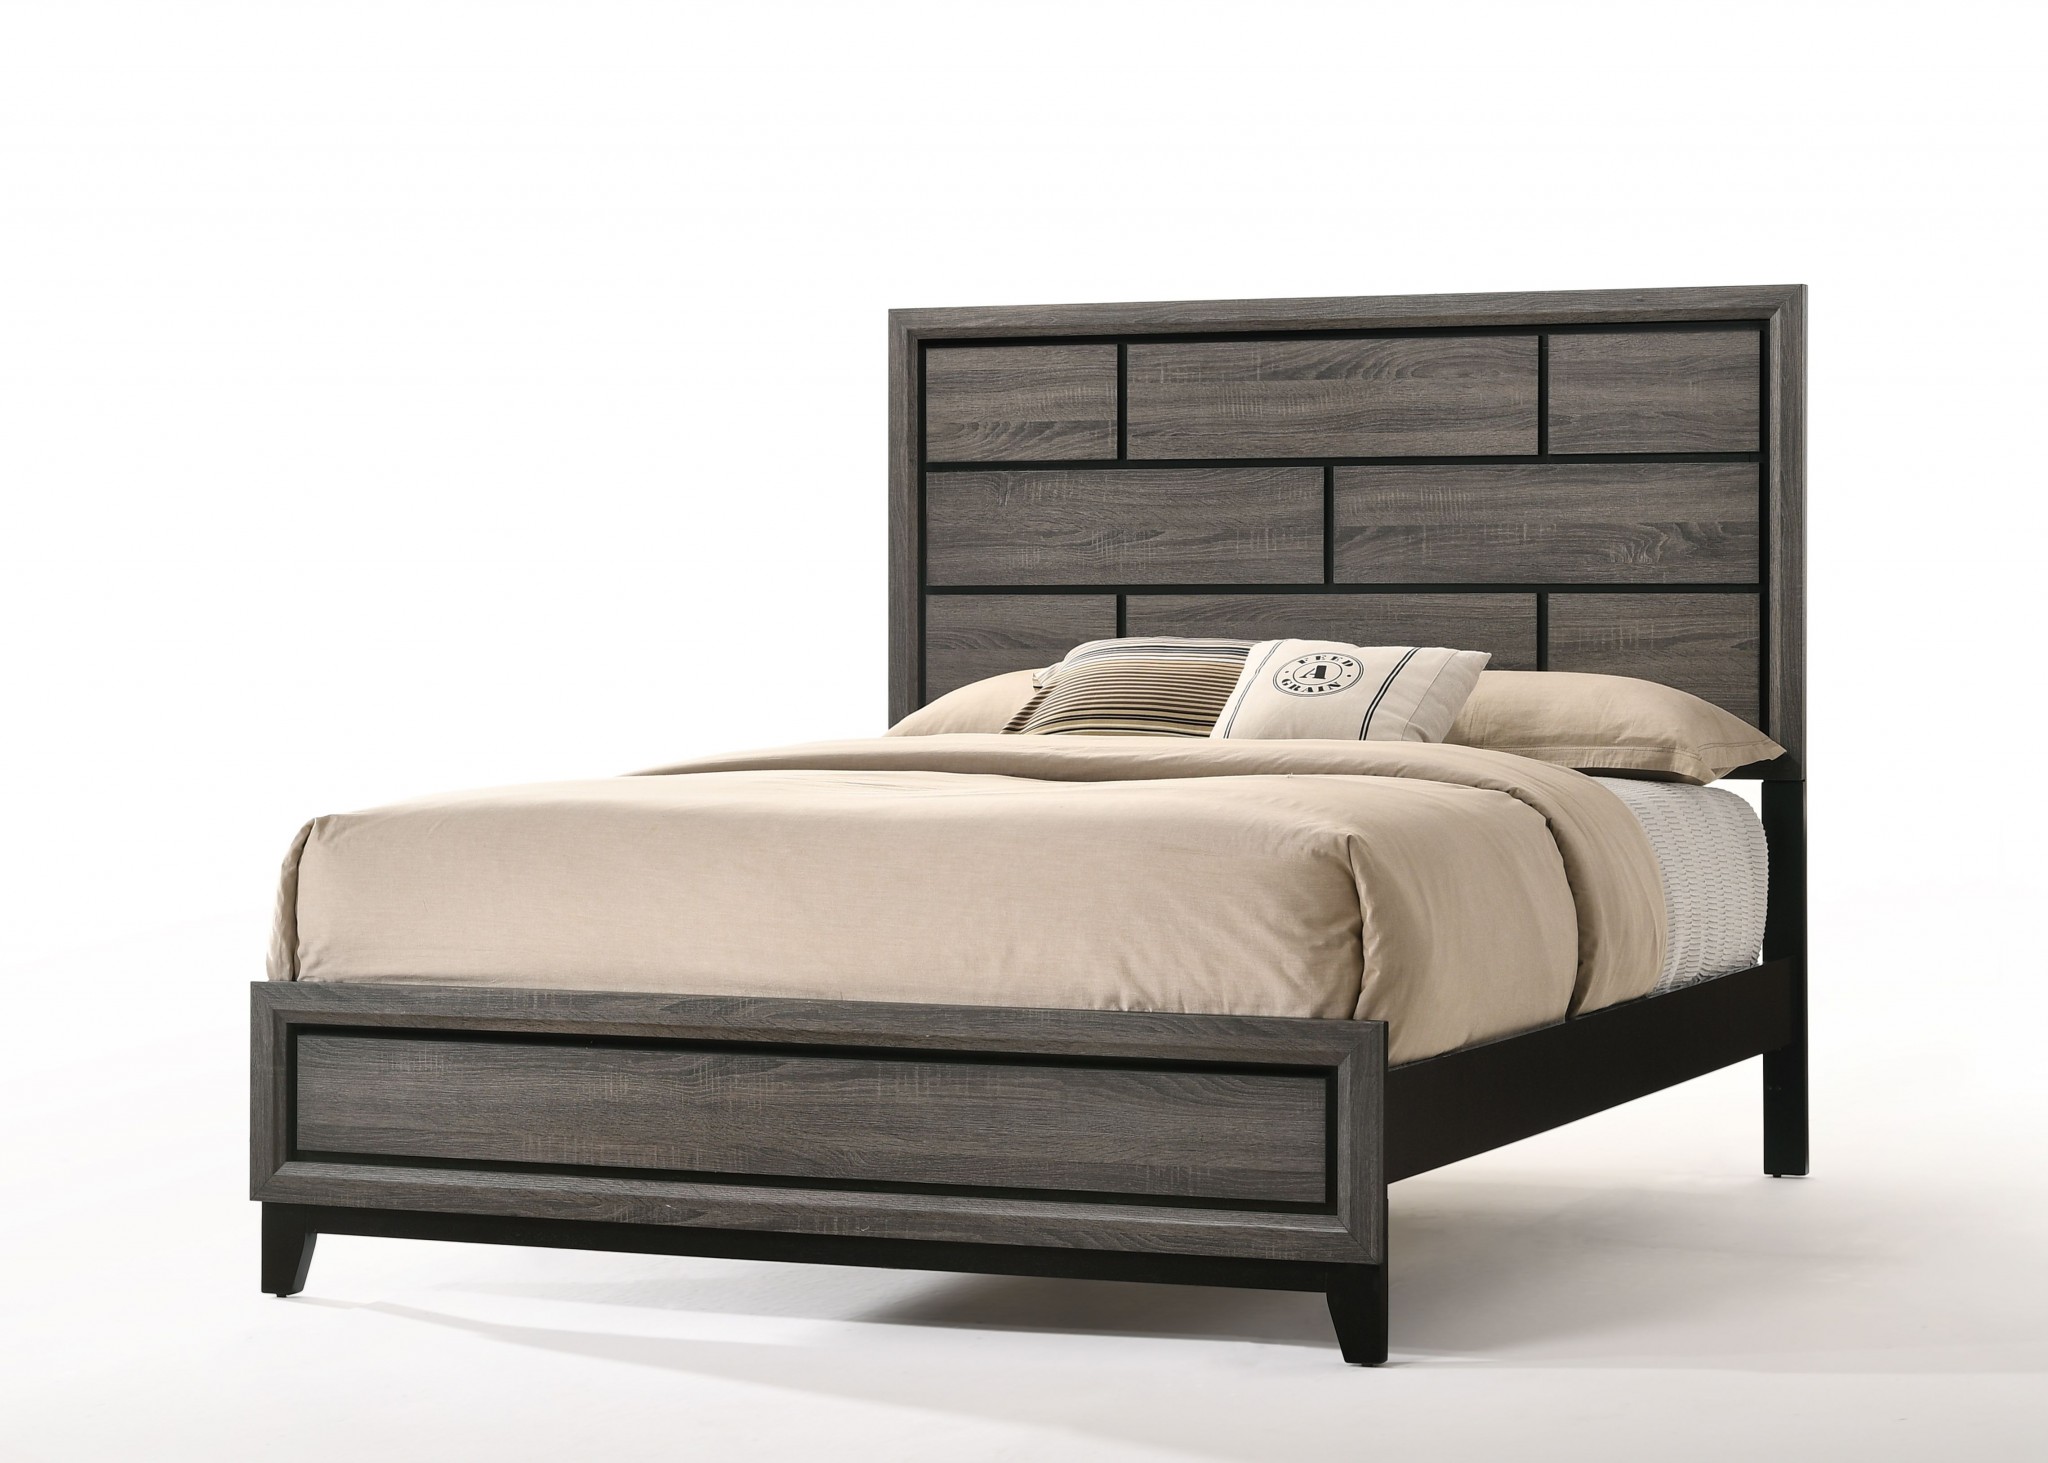 86" X 79" X 56" Weathered Gray Eastern King Bed